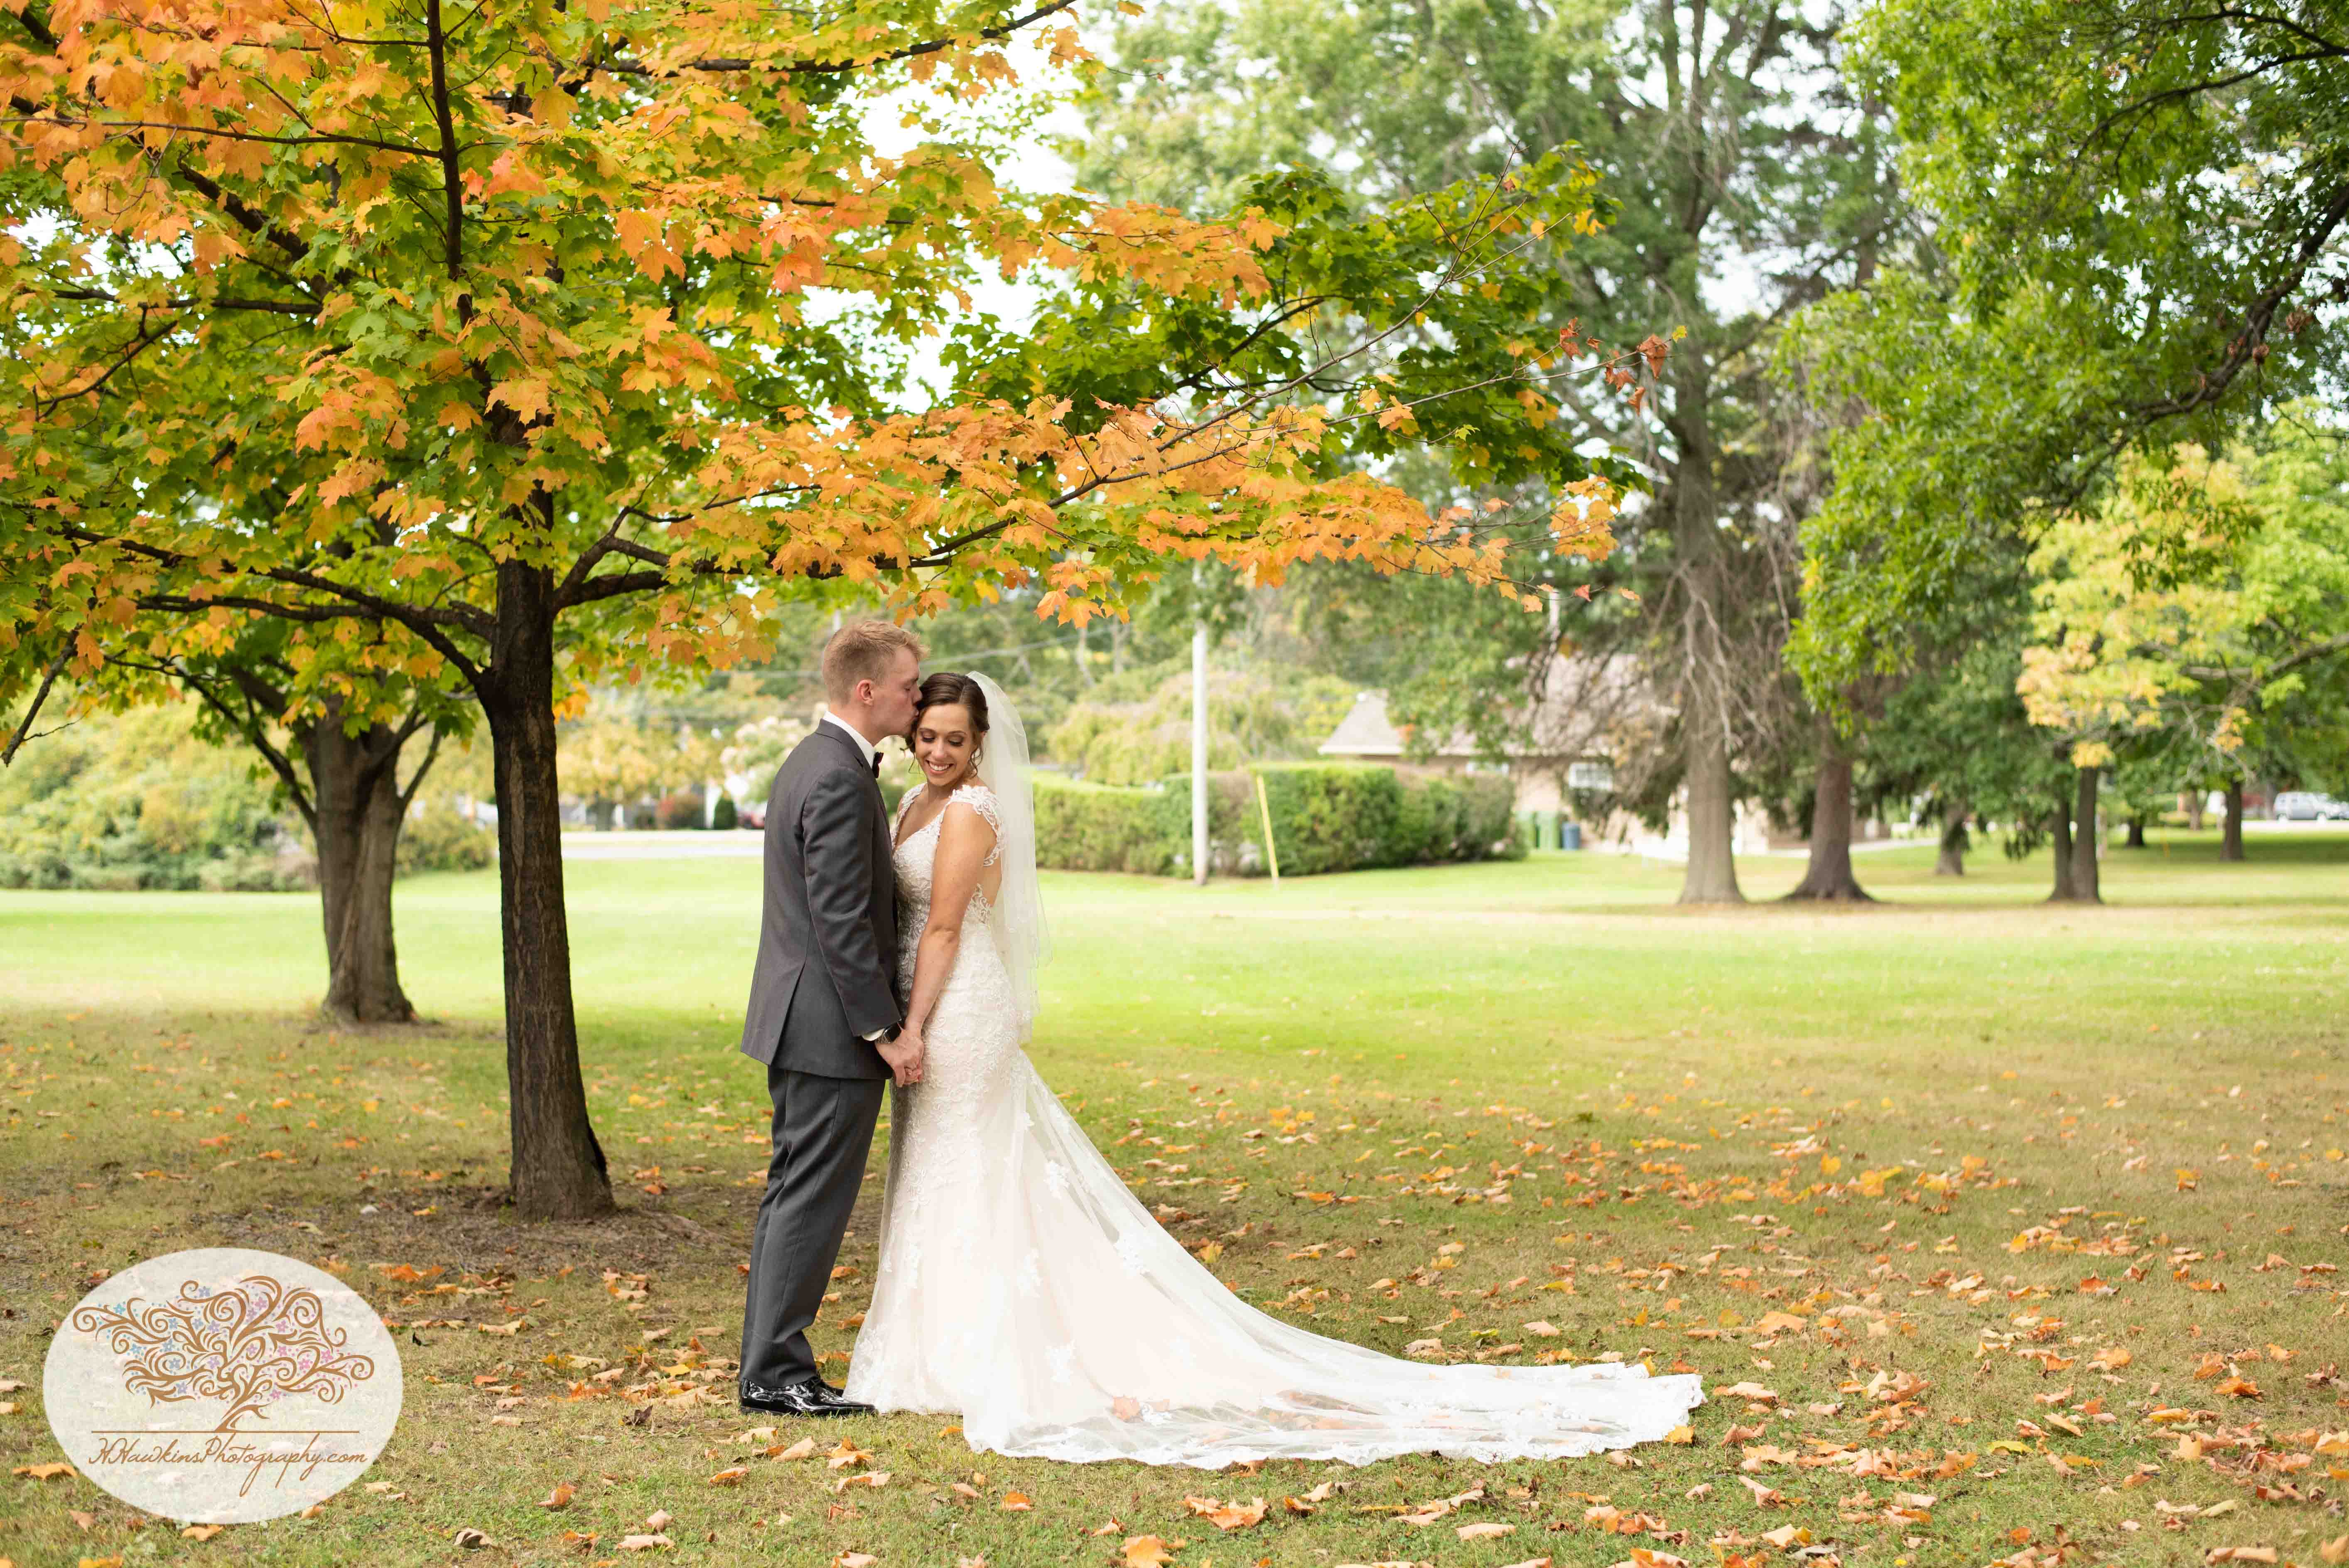 Groom kisses bride on the temple while she looks down standing in front of autumn tree